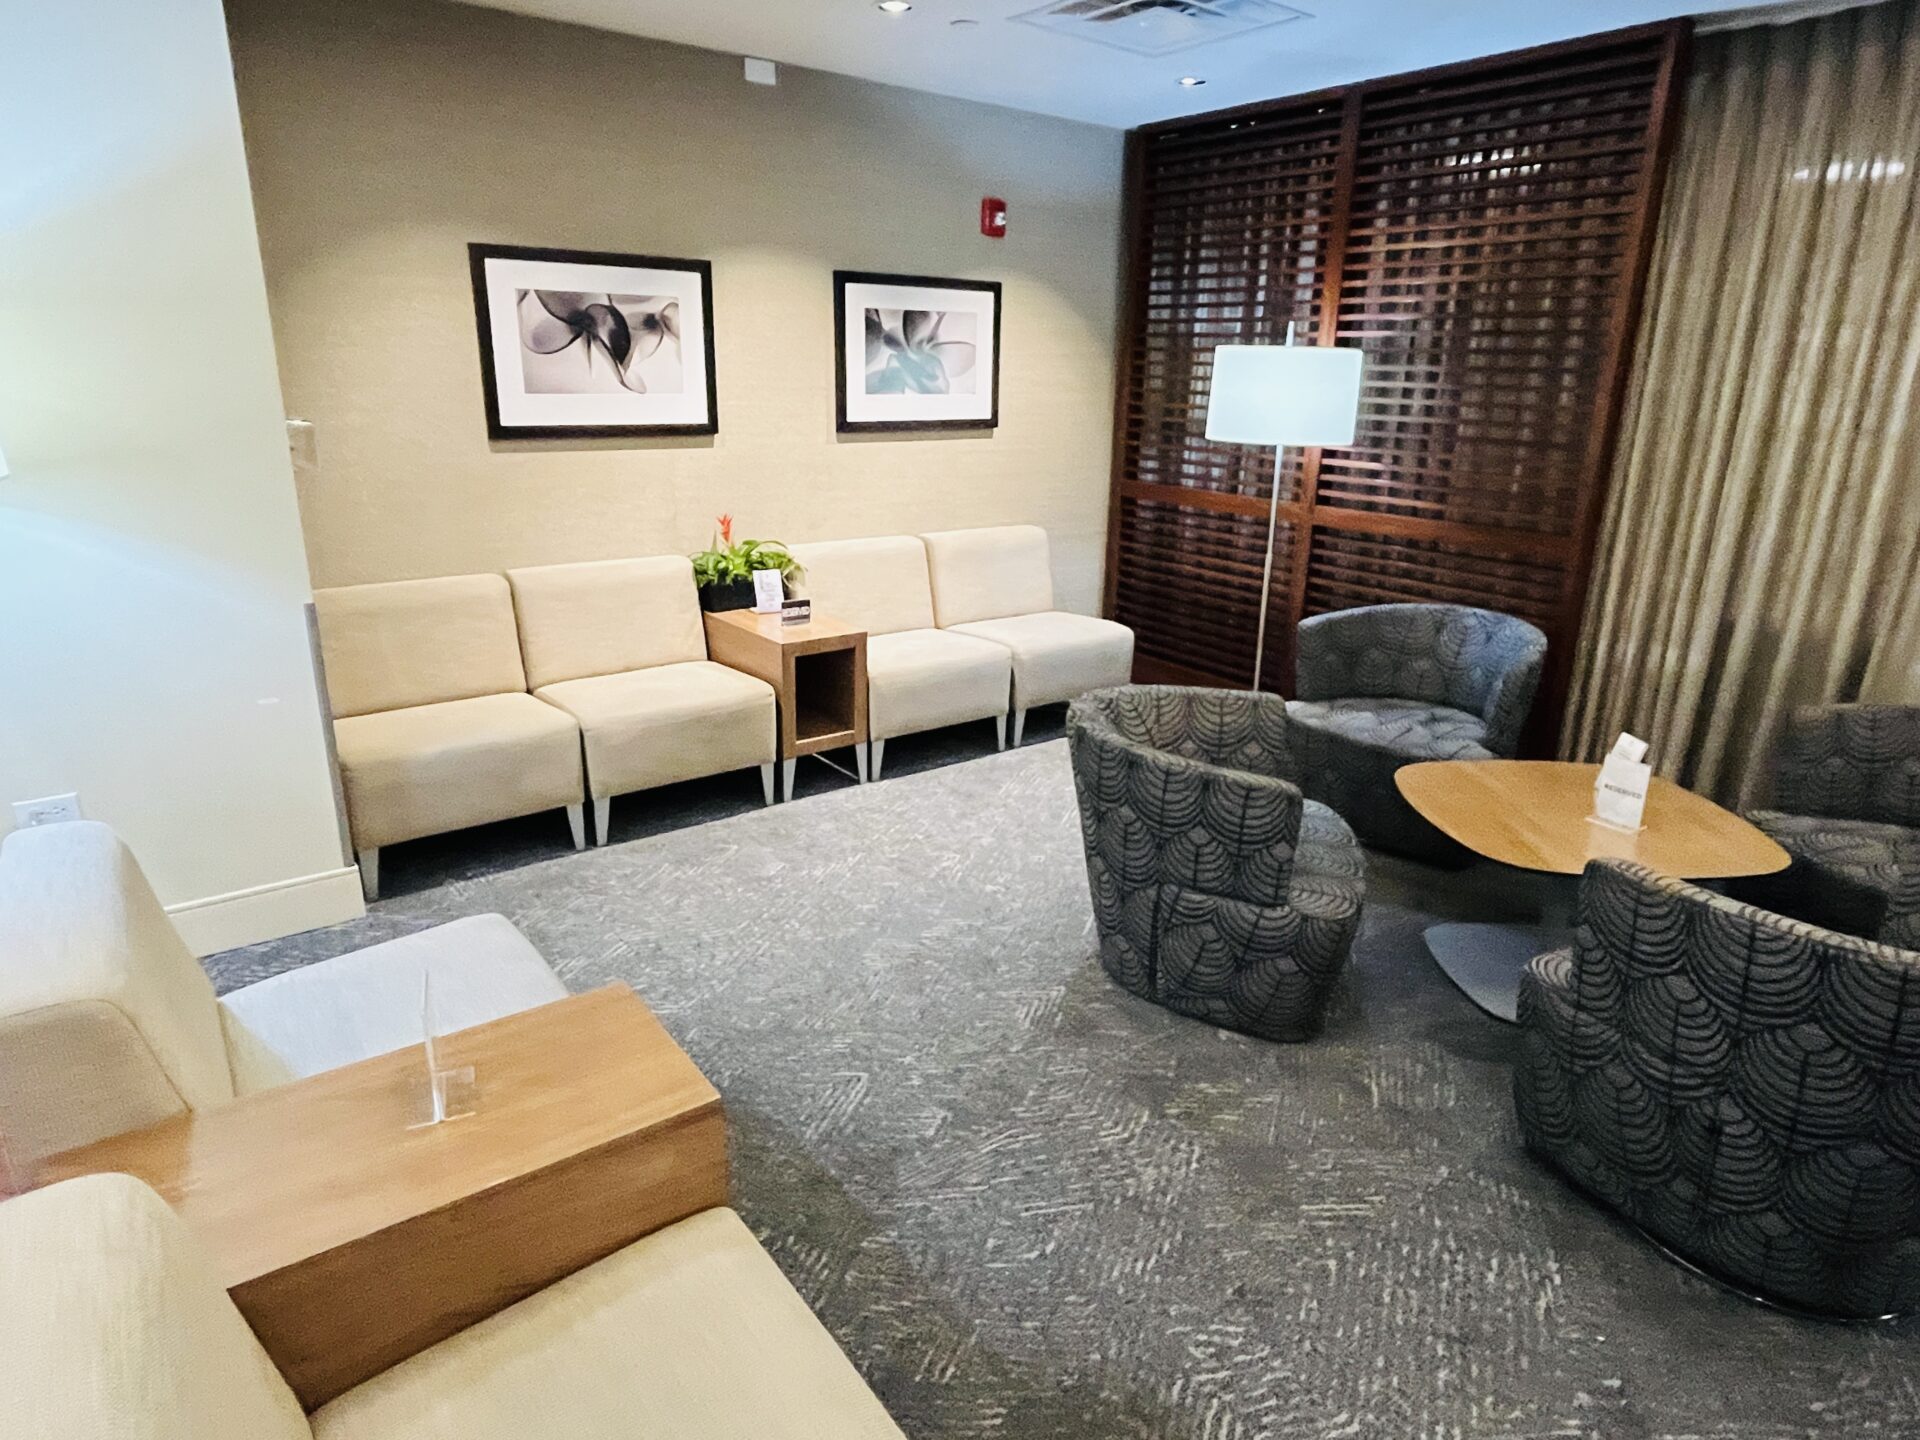 Review: The Plumeria Lounge Priority Pass at Honolulu Airport